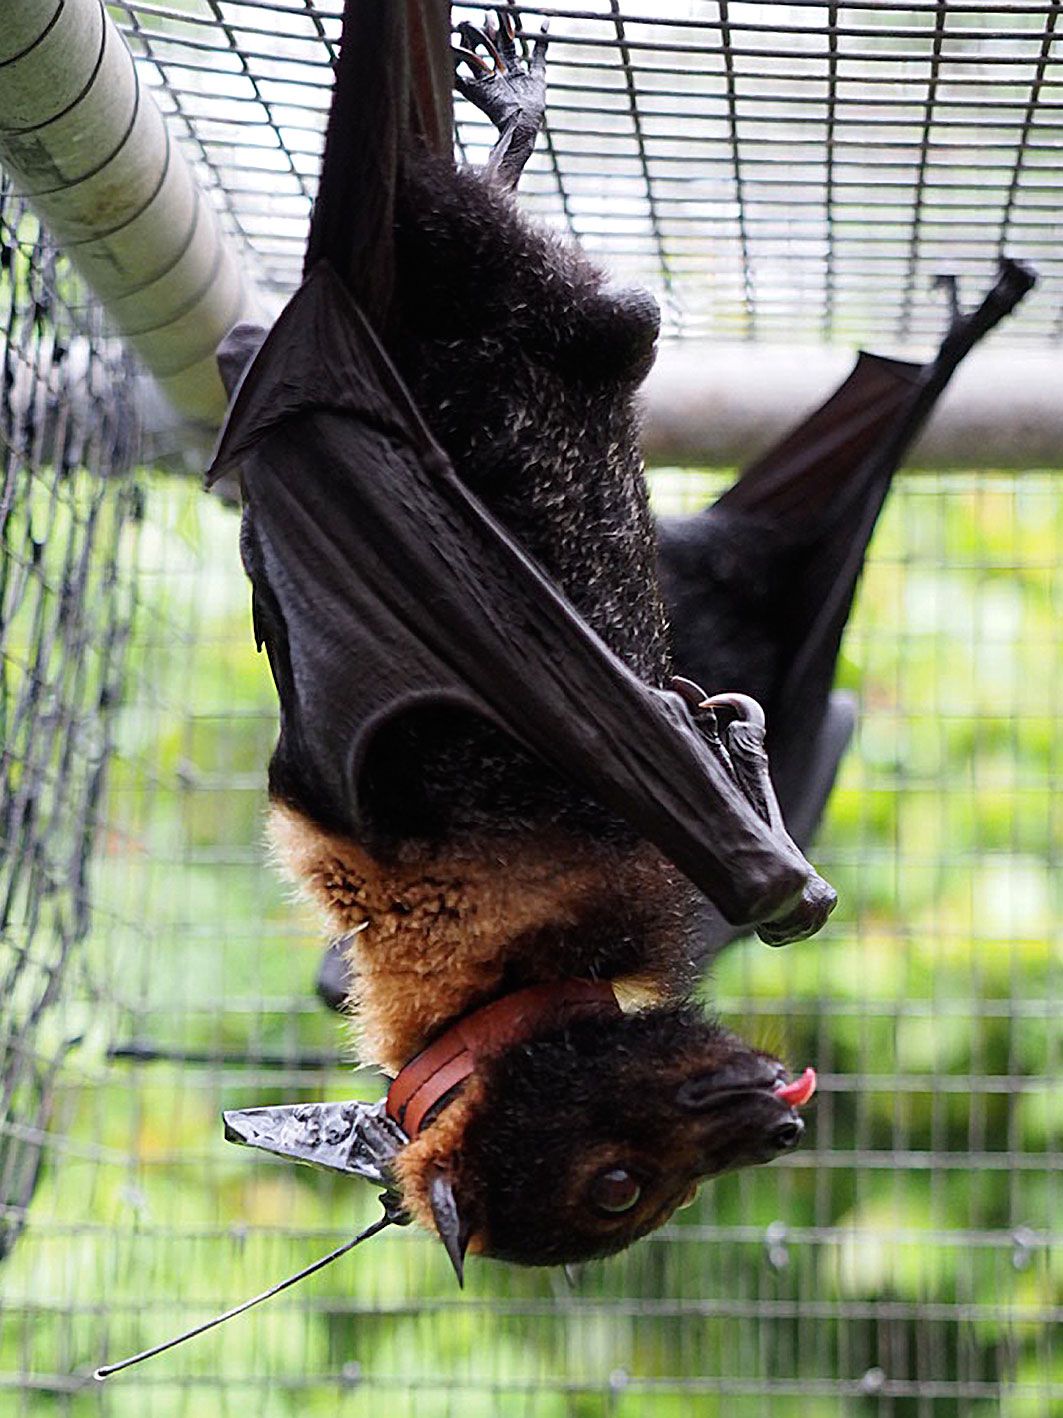 spectacled flying fox (Pteropus conspicillatus) with the collar